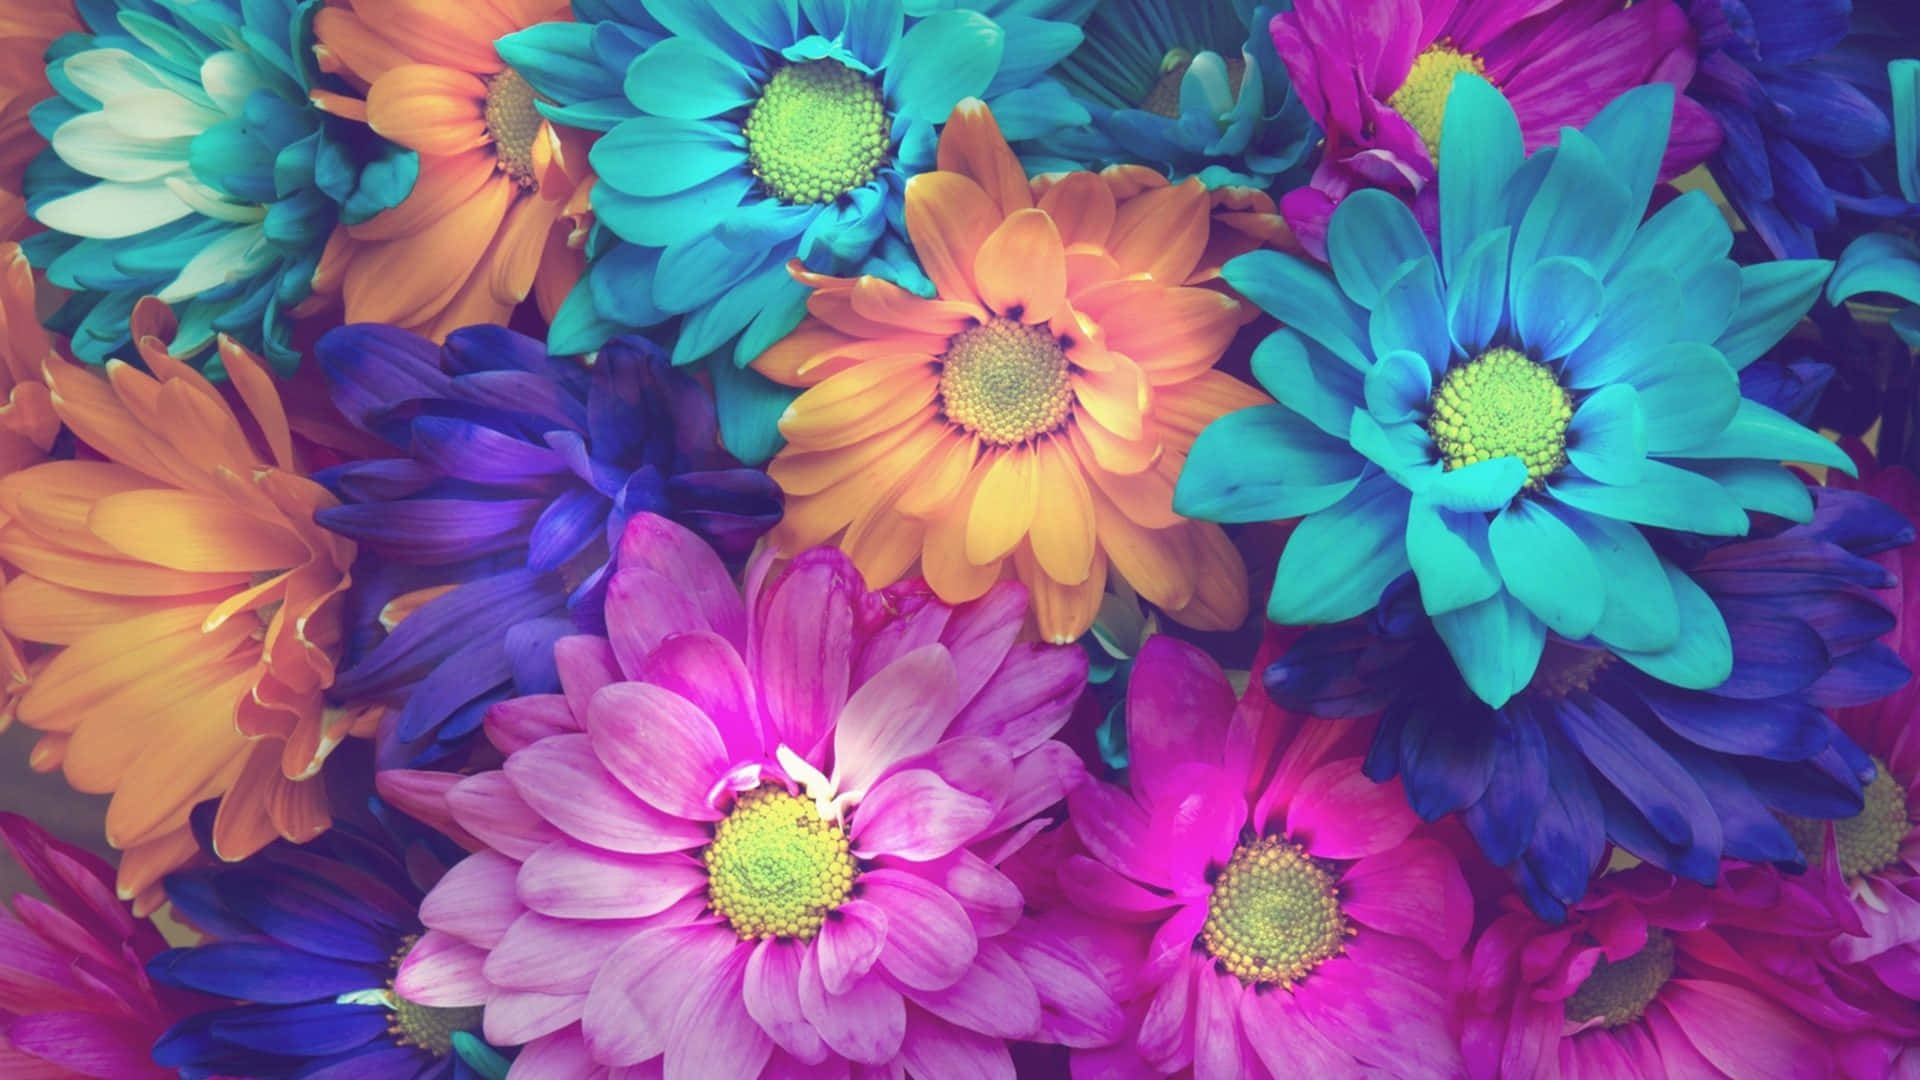 A Vibrant Display of Colorful Flowers Wallpaper